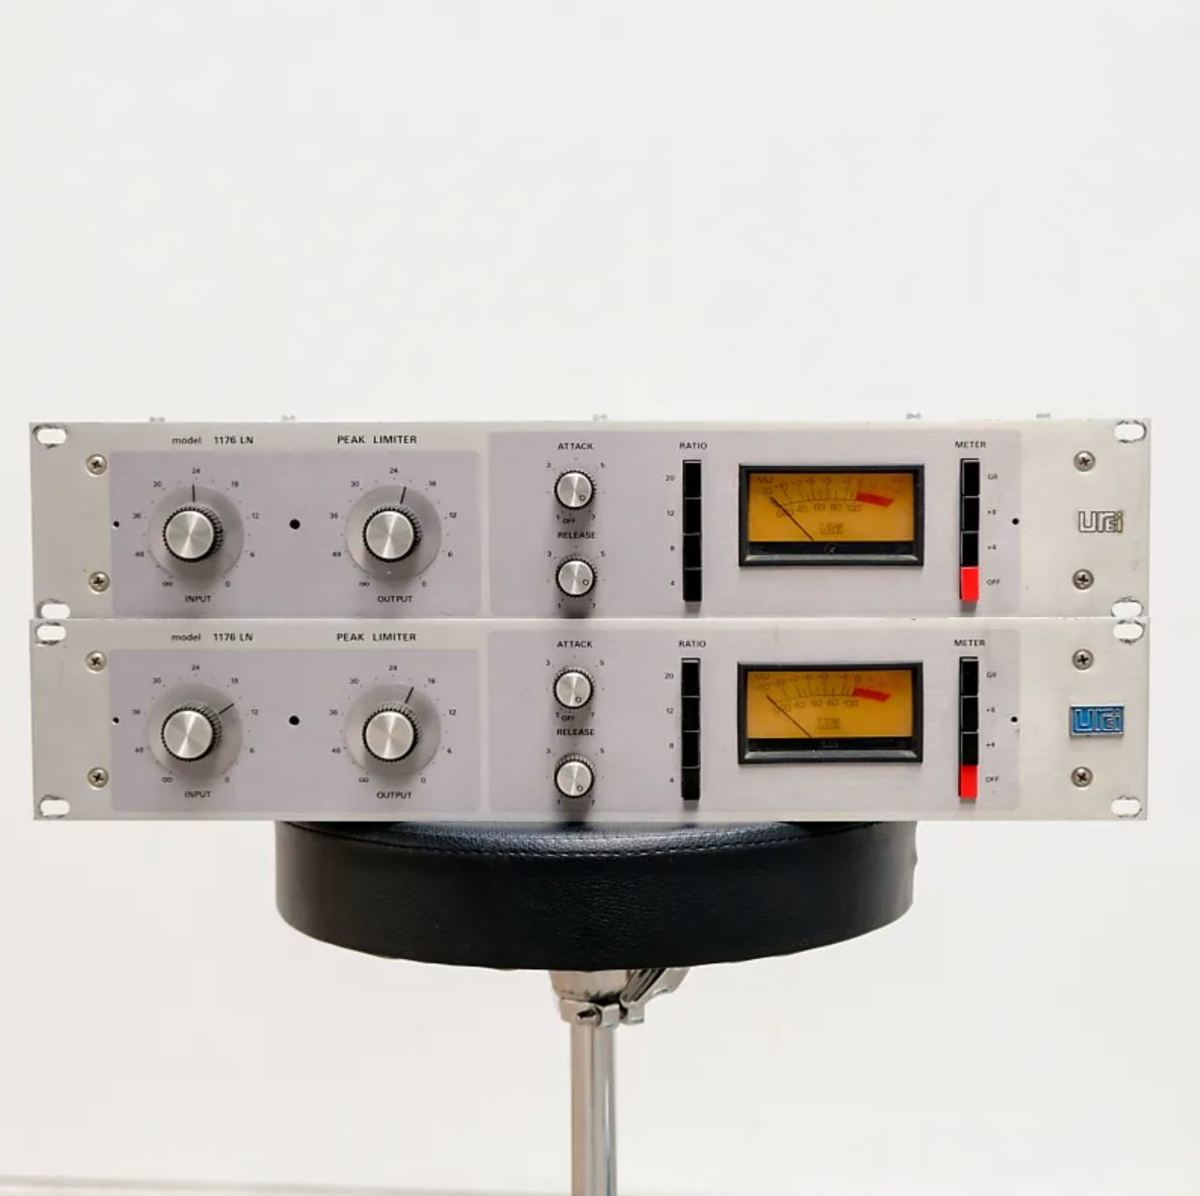 Polo & Pan Are Selling Their Personal Collection of Vintage Audio Equipment